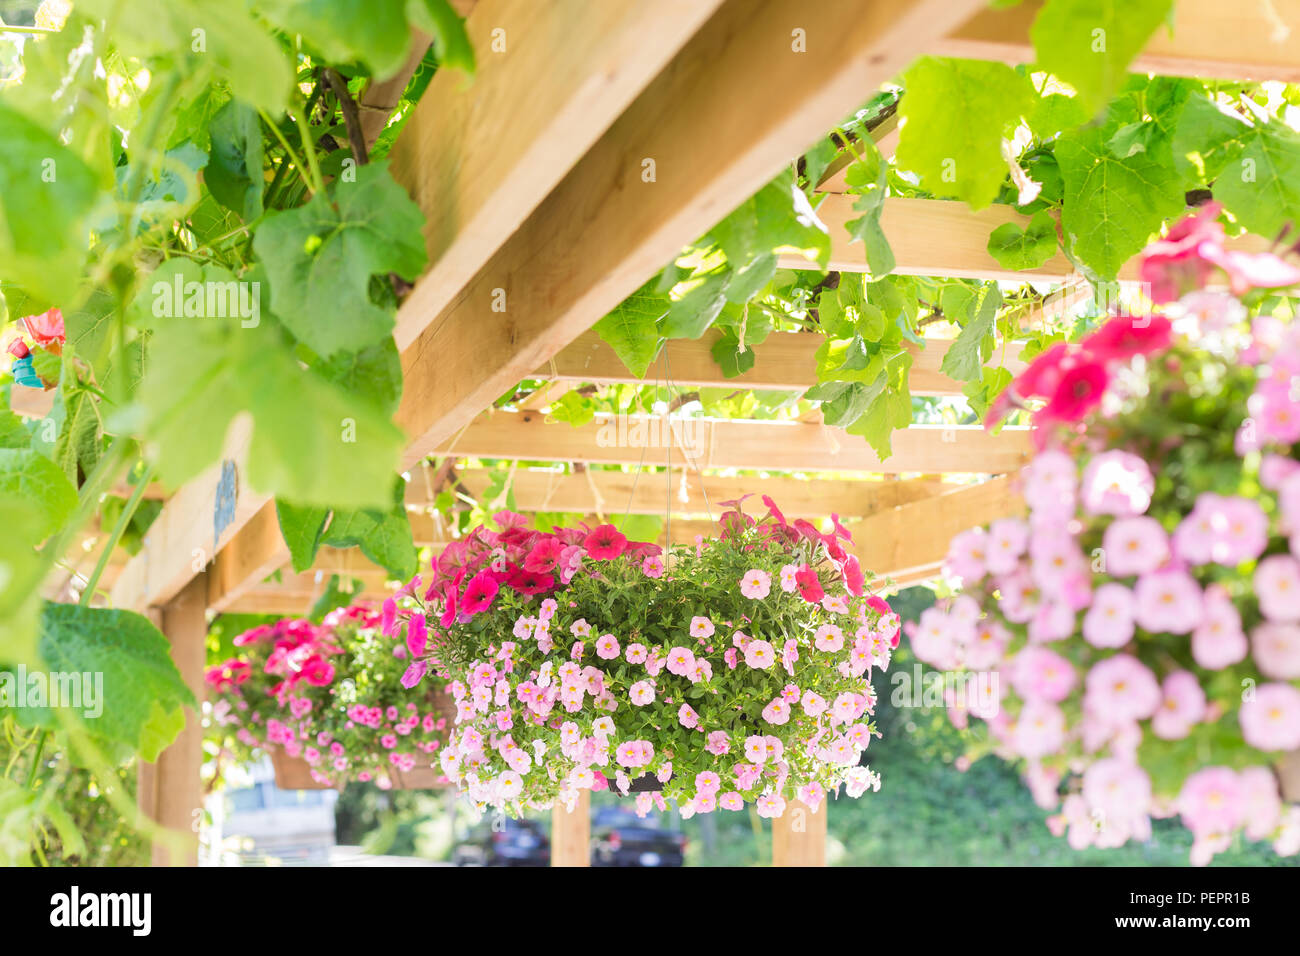 Baskets in a hanging flower garden on a sunny day. Stock Photo